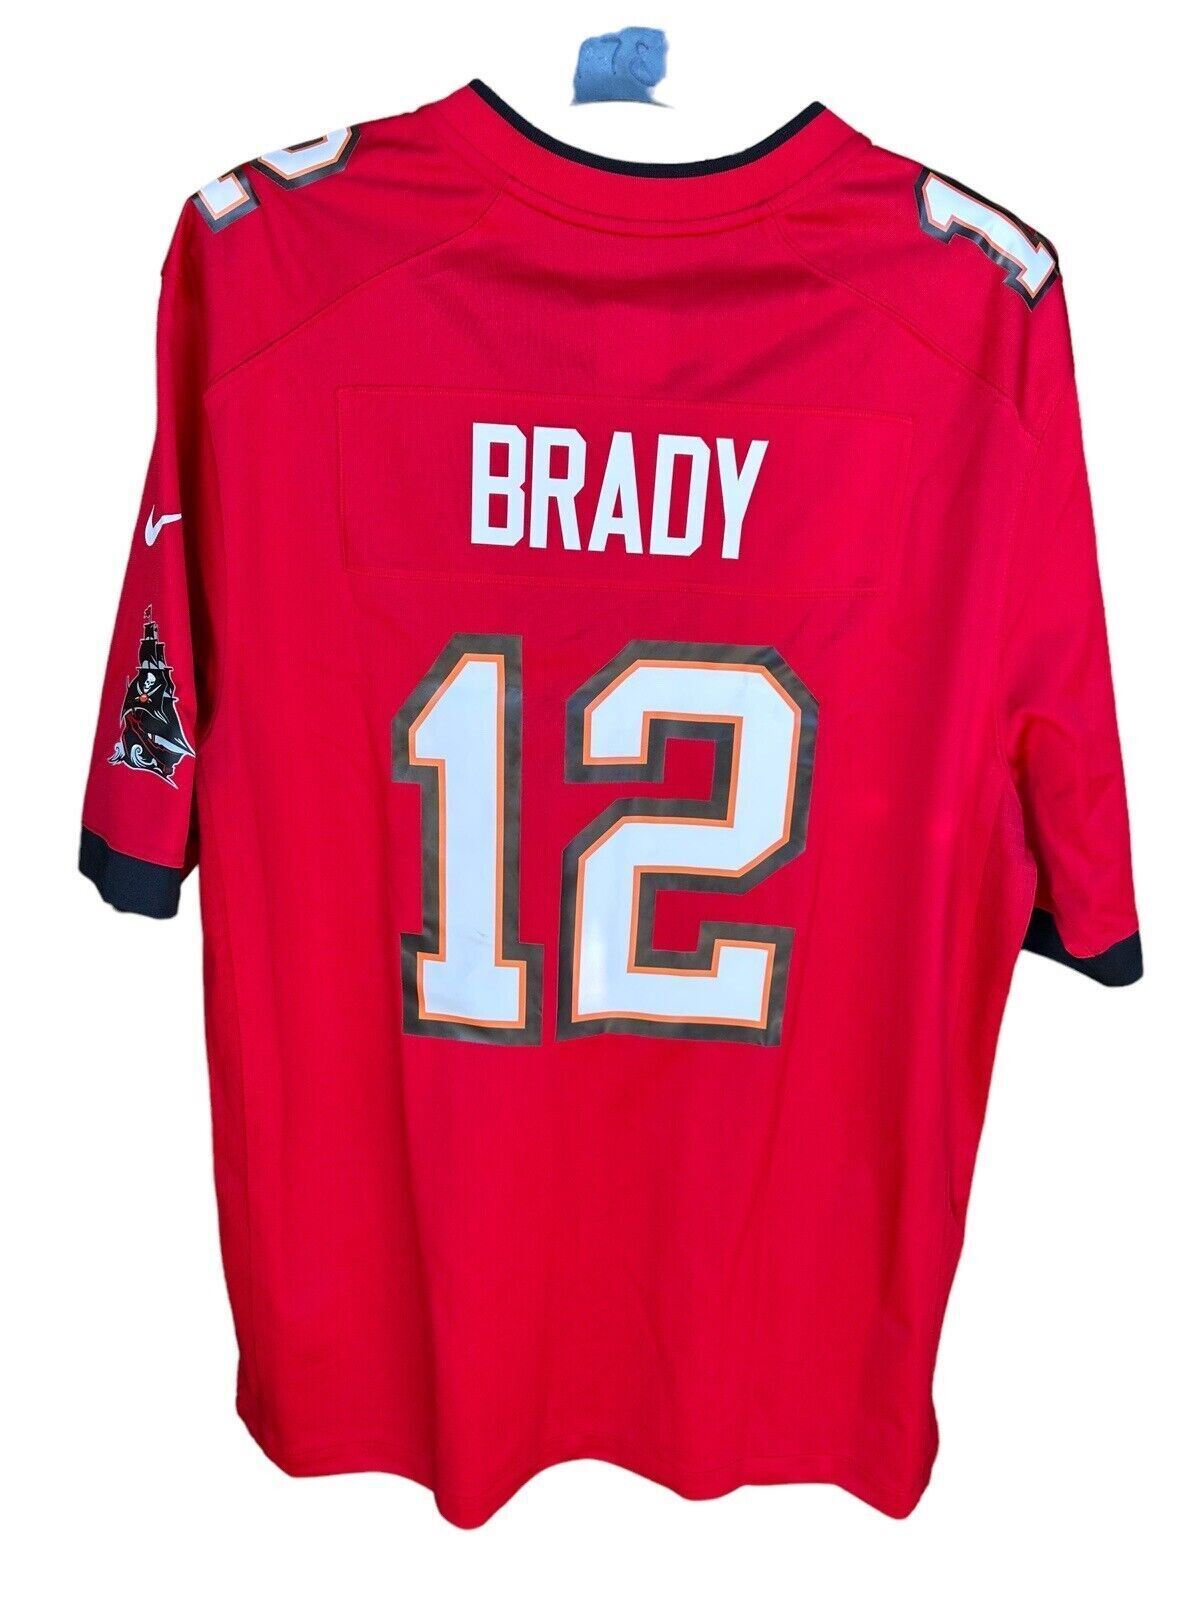 Nike NFL Tampa Bay Buccaneers Home Jersey BRADY 12 Mens Large